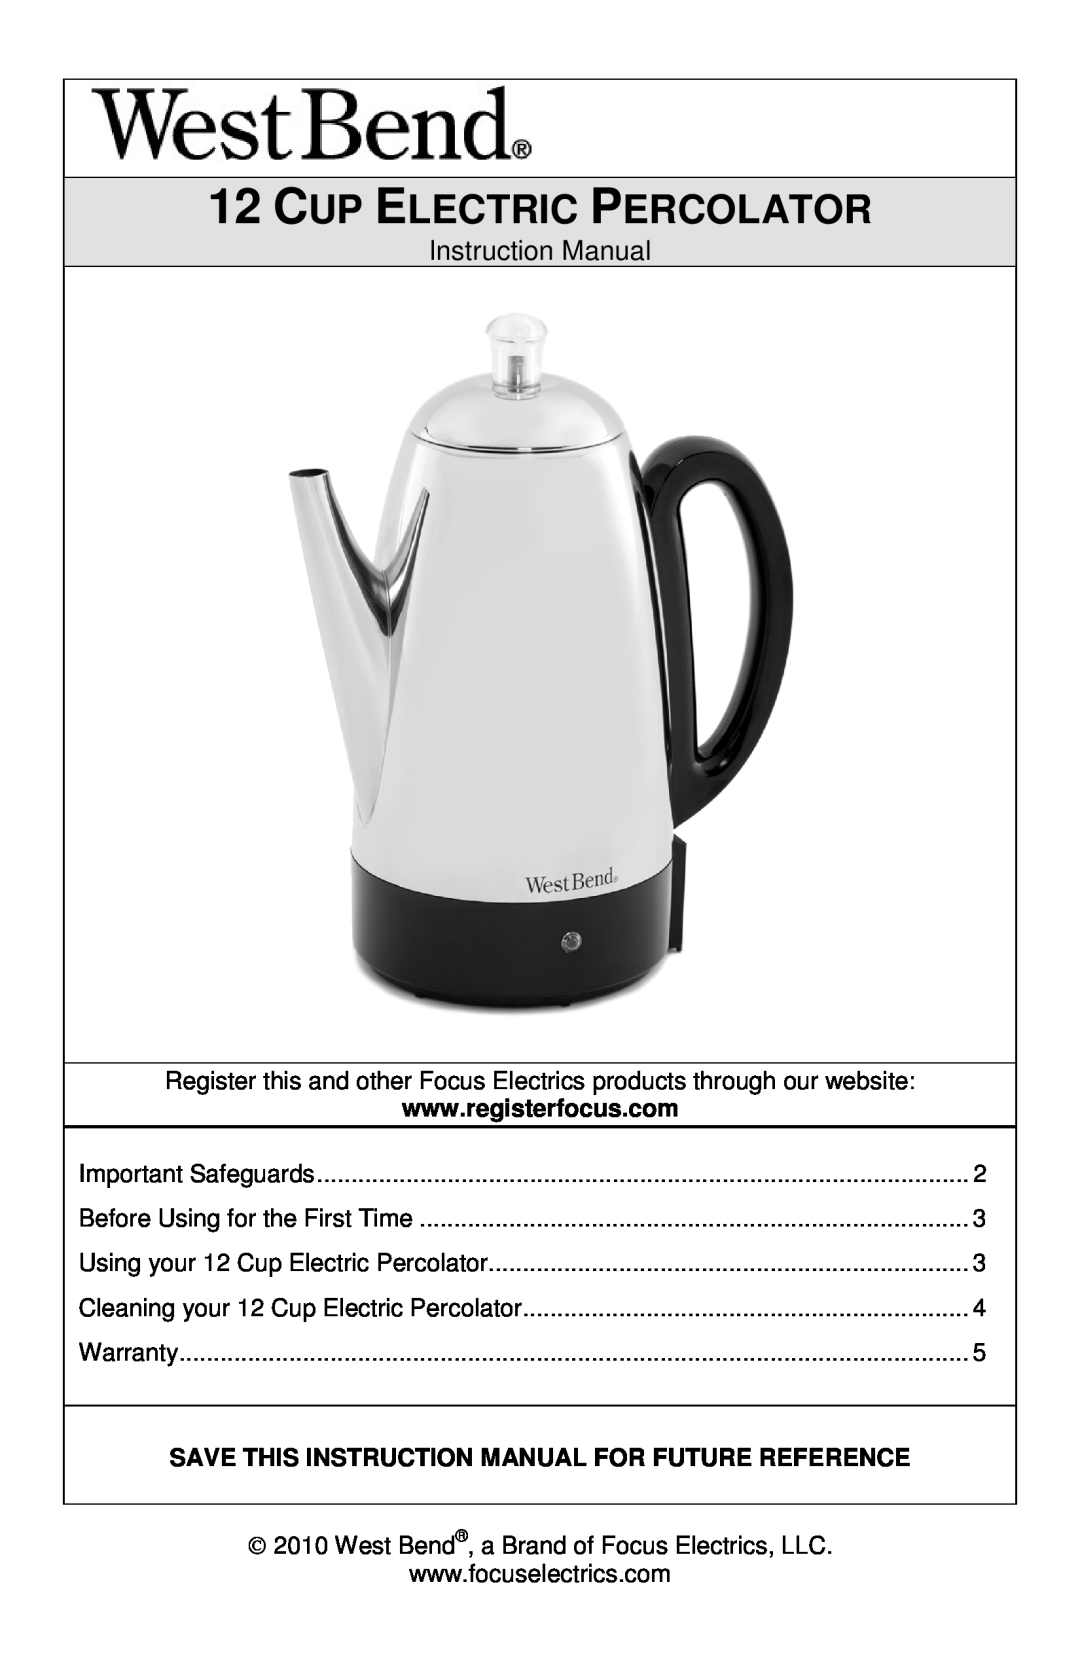 West Bend L5806, 54159 instruction manual 12CUP ELECTRIC PERCOLATOR 